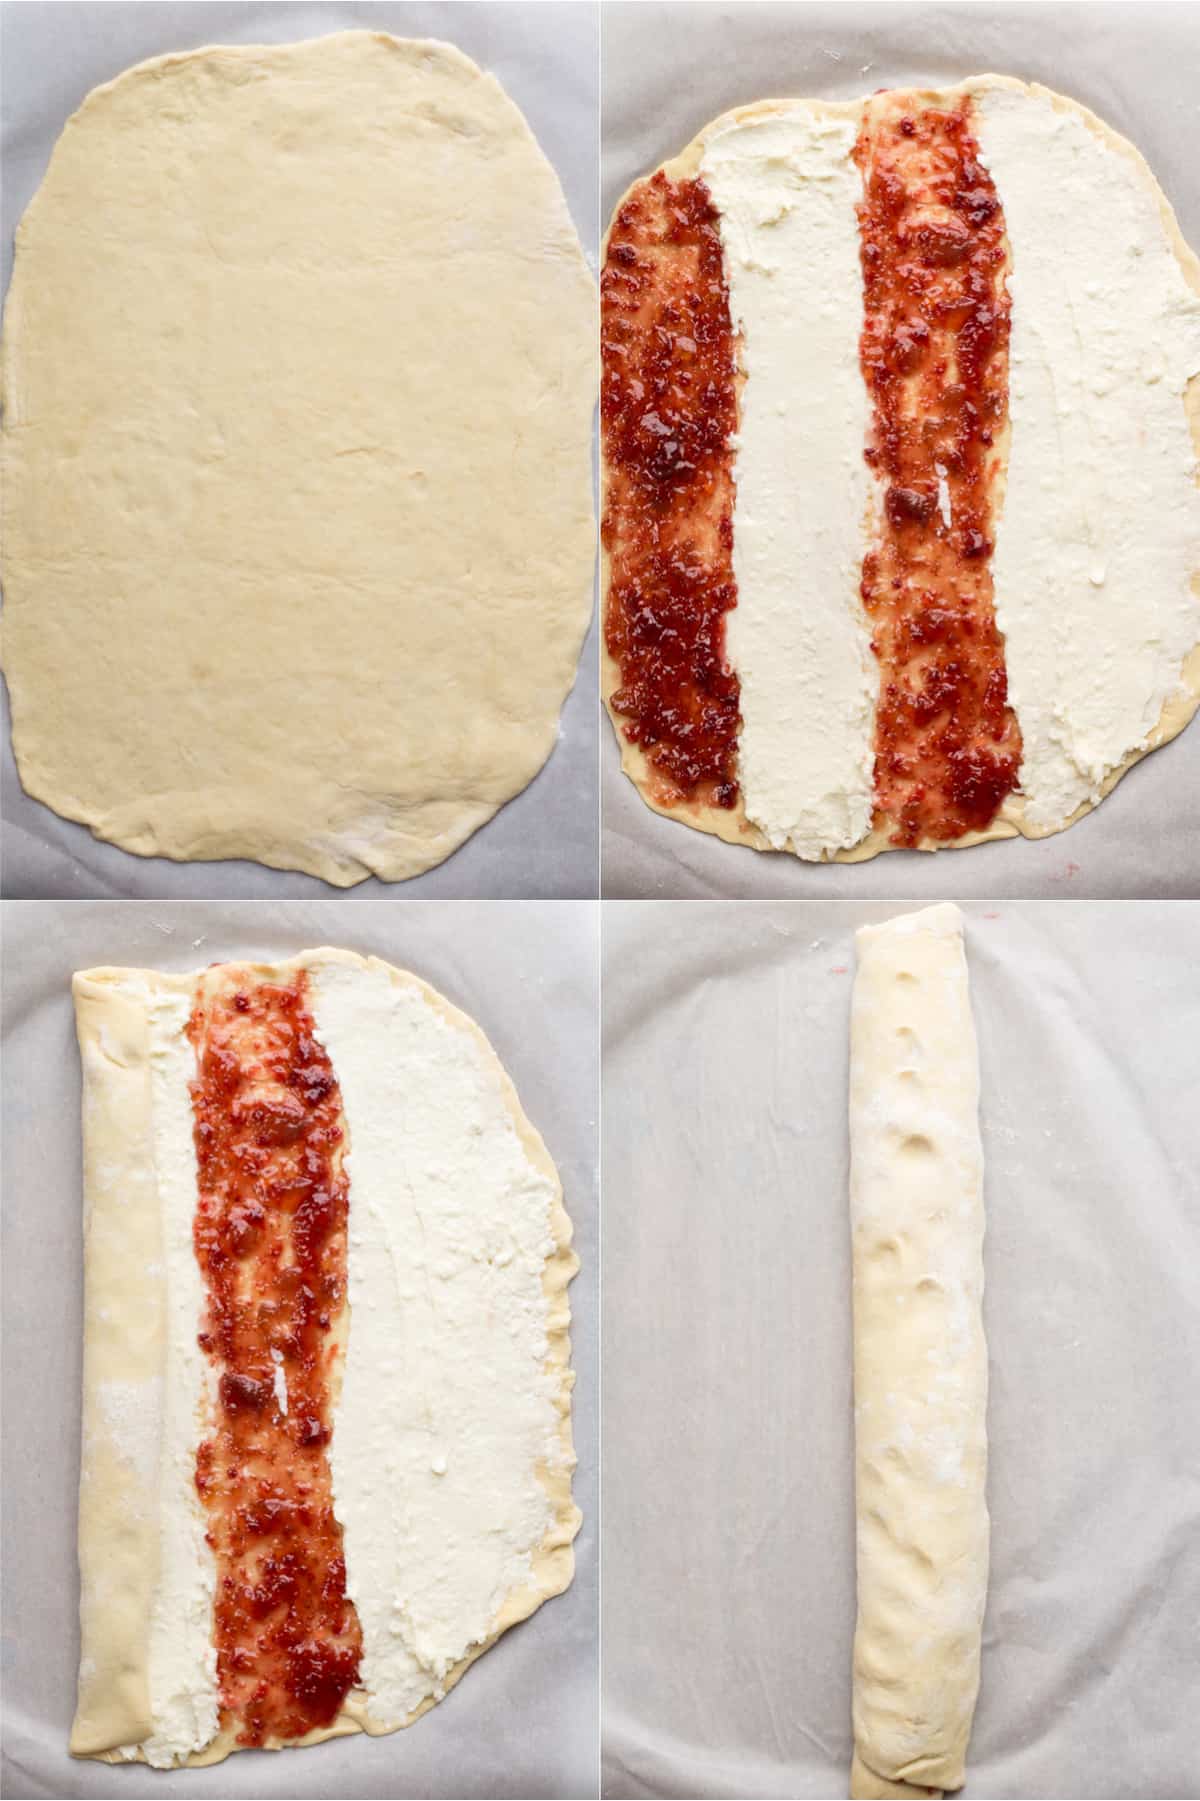 Step by step instructions. How to fill the sweet bread with cream cheese and jam. 